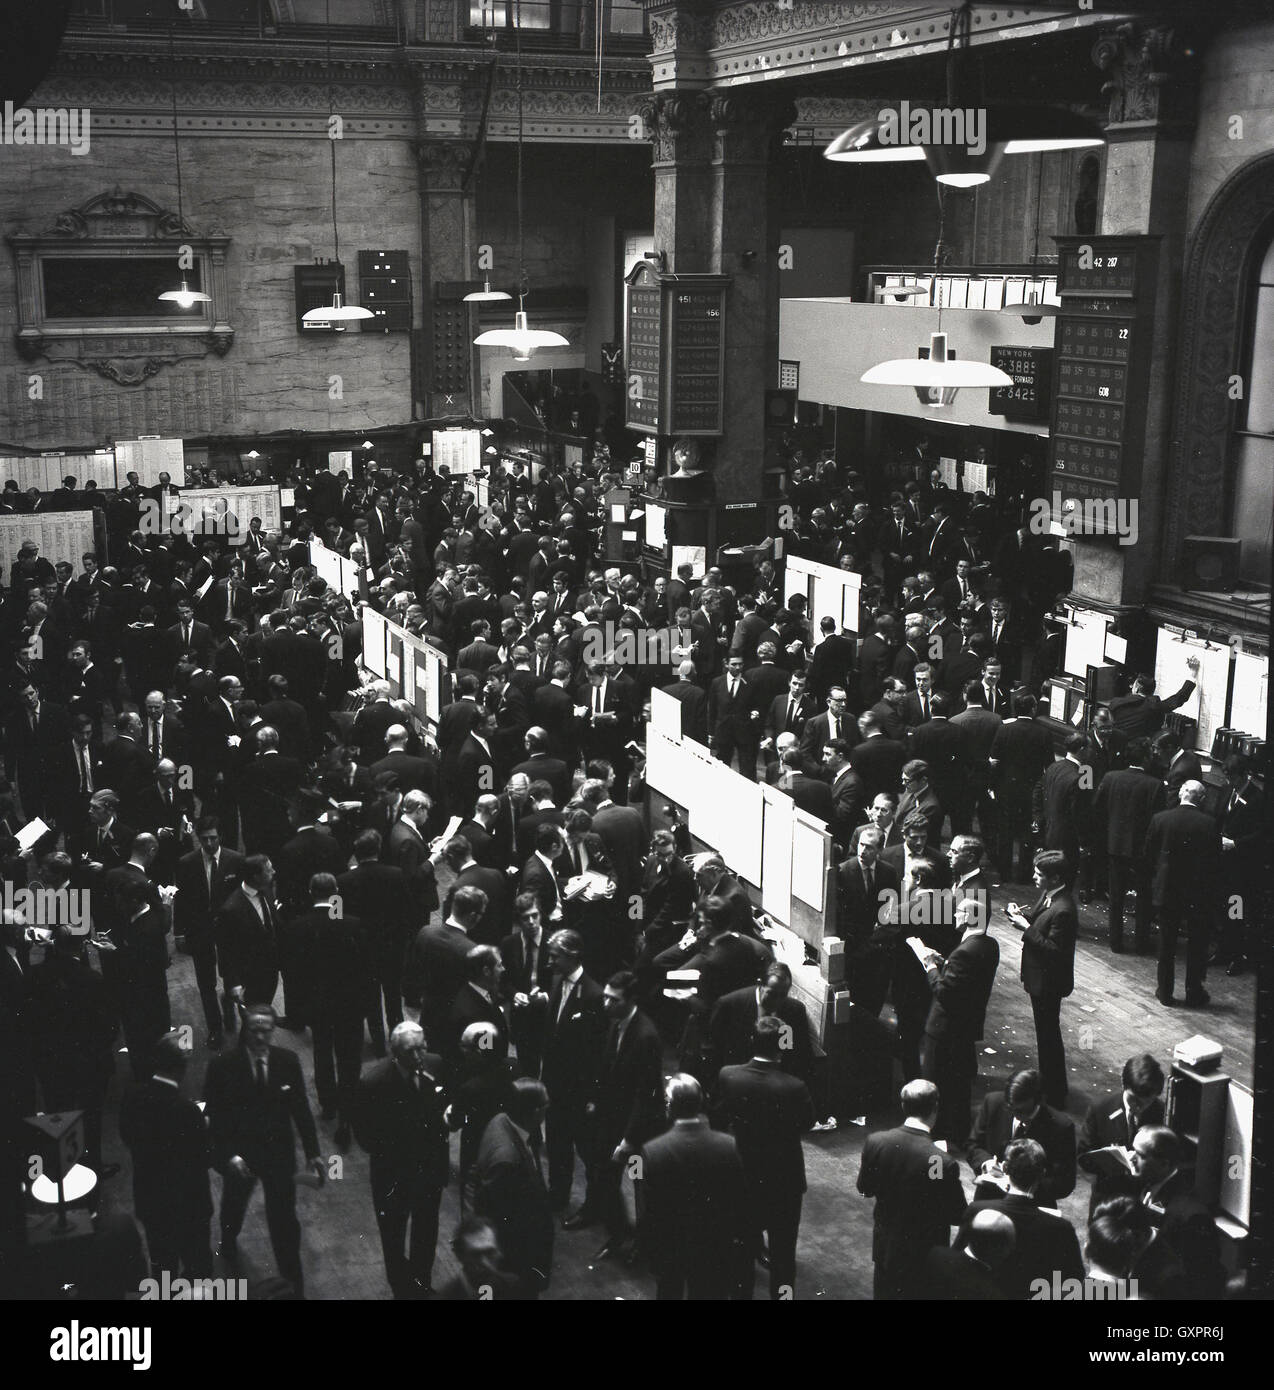 1950s, historical, general activity inside the large trading hall of the London stock exchange, London, England. Stock Photo